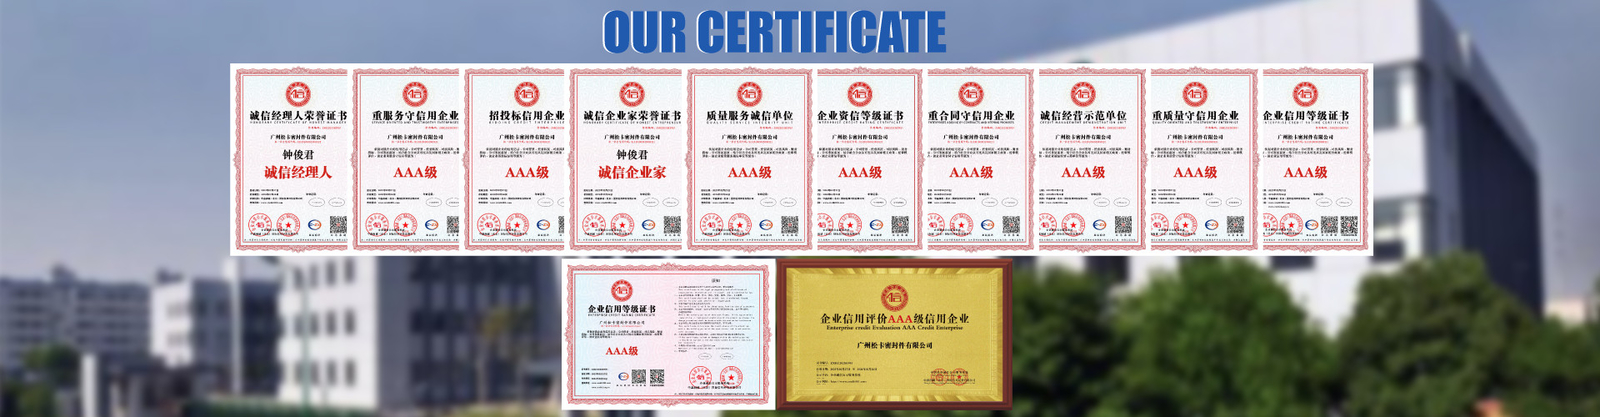 quality Hydraulic Oil Seals factory